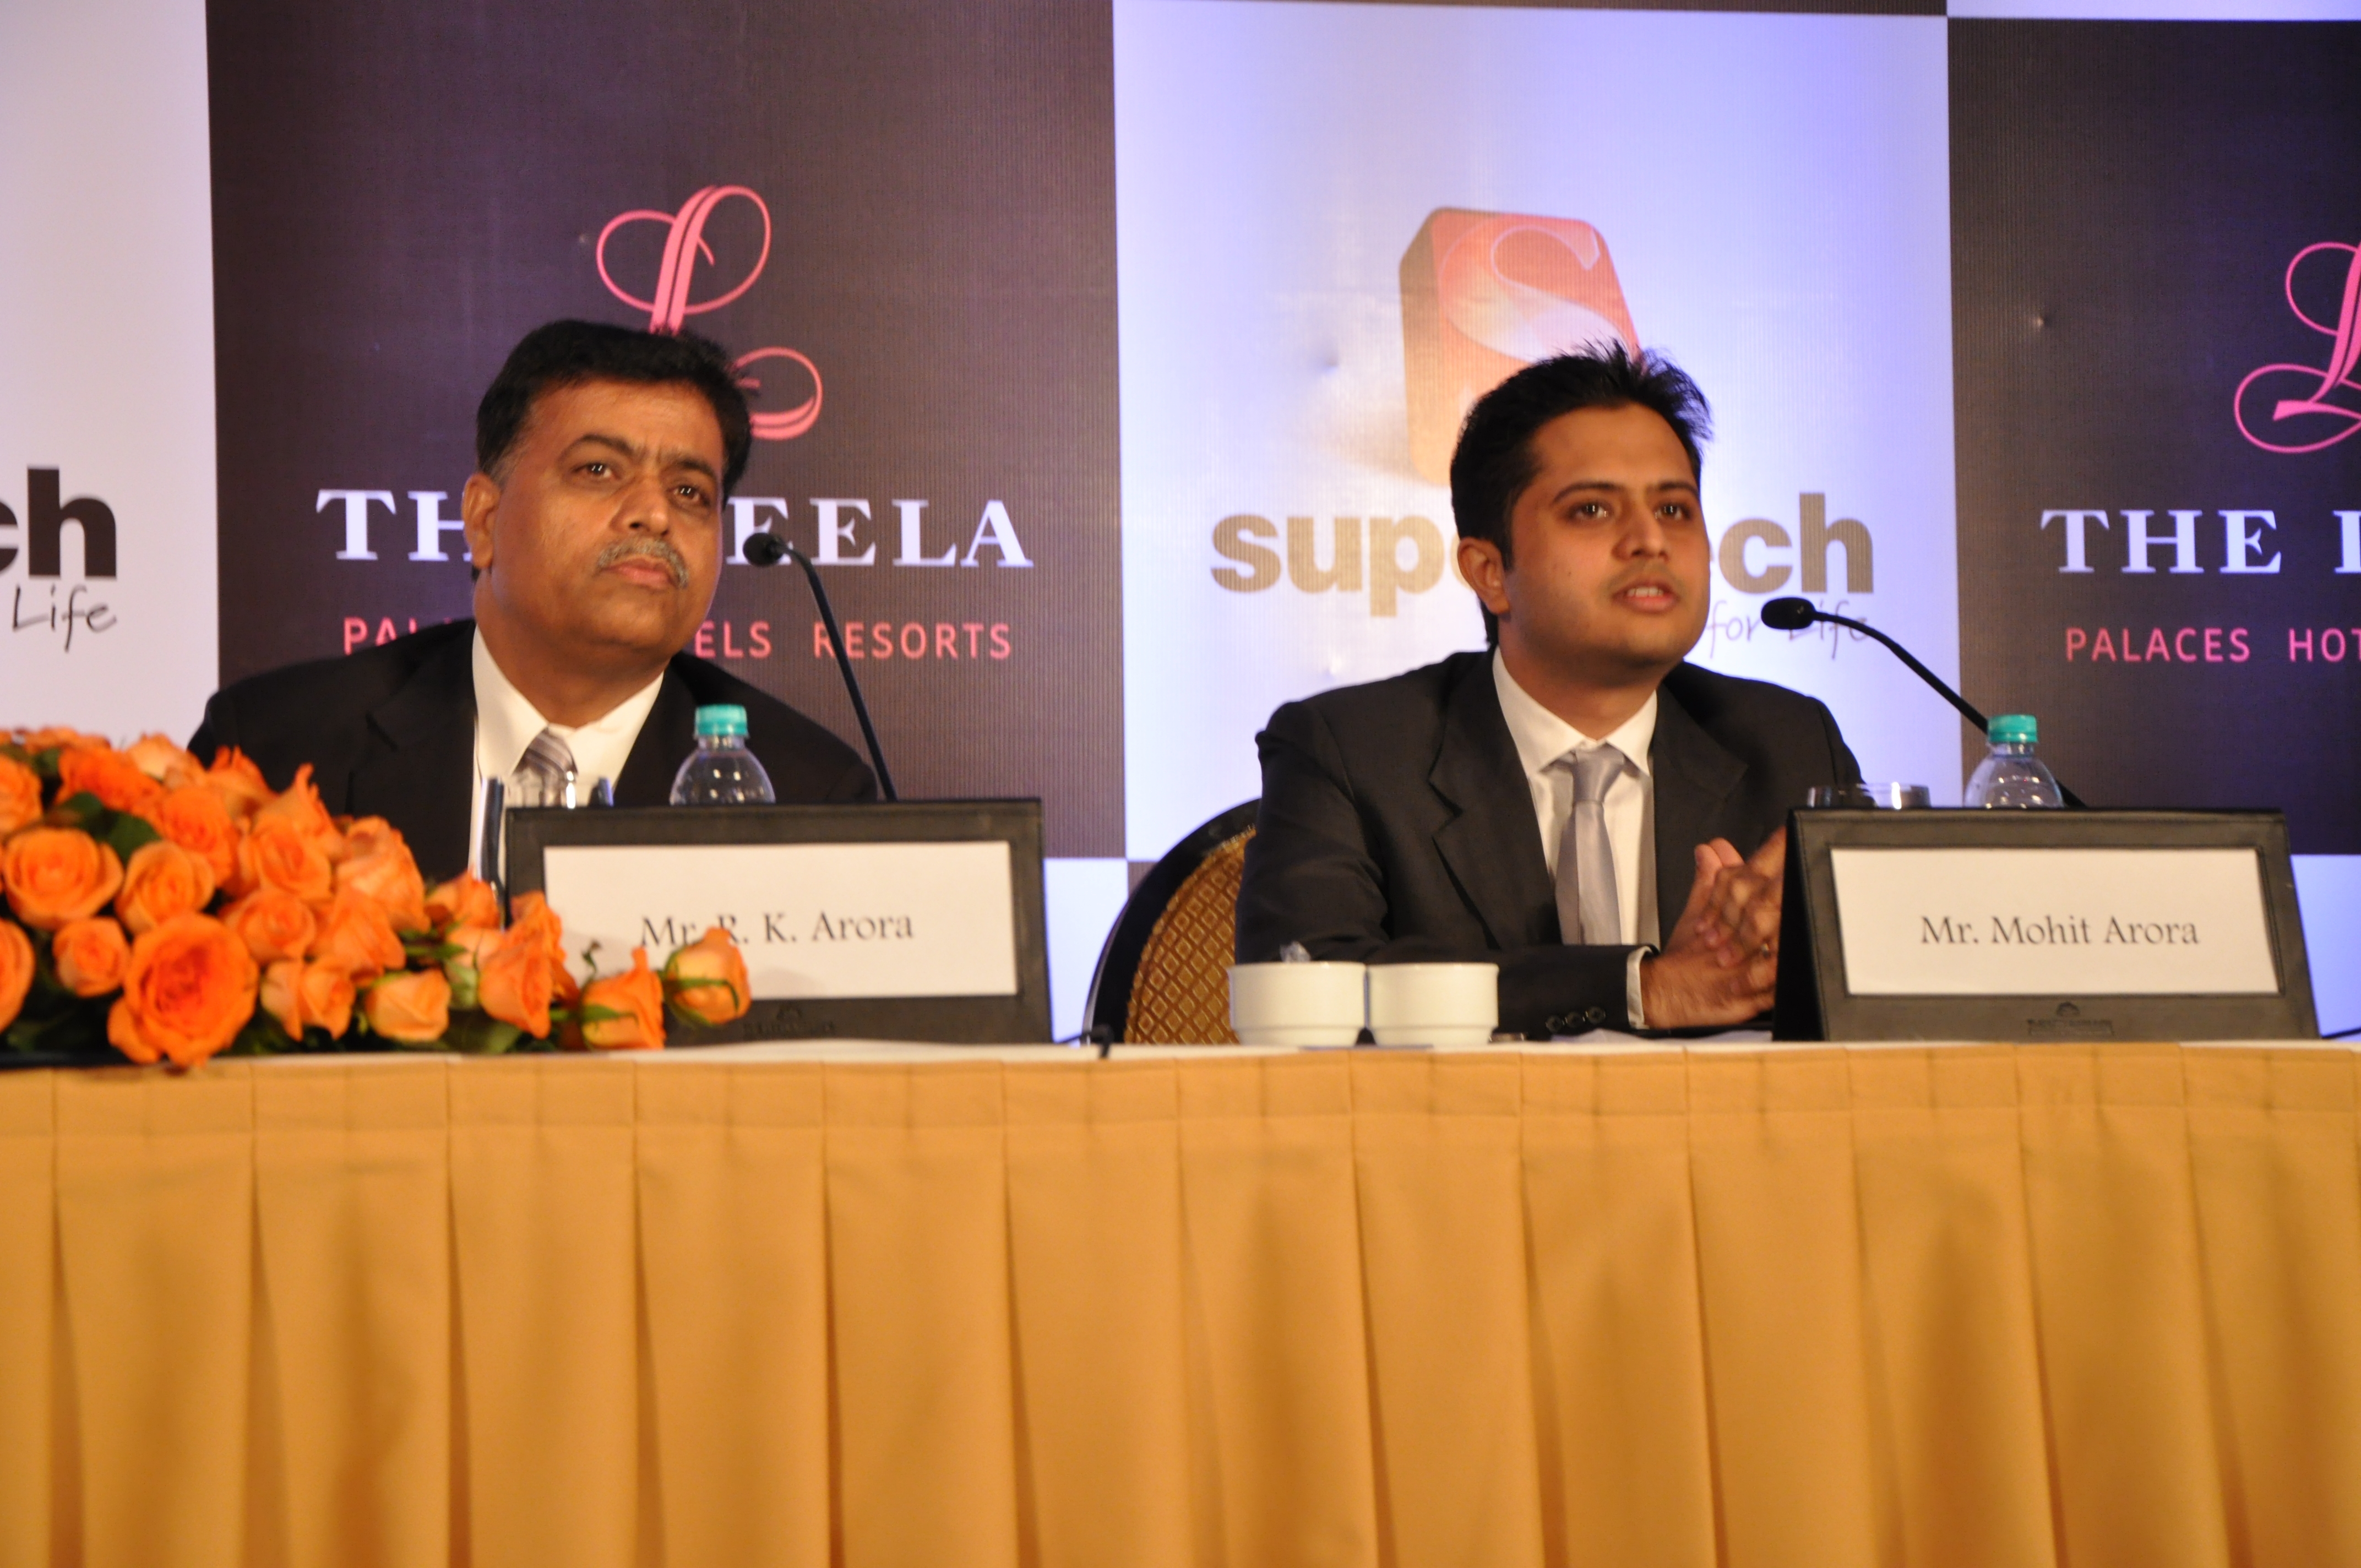 Supertech-Leela, India real estate news, Indian realty news, Property new, Home, Policy Advocacy, Activism, Mall, Retail, Office space, SEZ, IT/ITeS, Residential, Commercial, Hospitality, Project, Location, Regulation, FDI, Taxation, Investment, Banking, Property Management, Ravi Sinha, Track2Media, Track2Realty